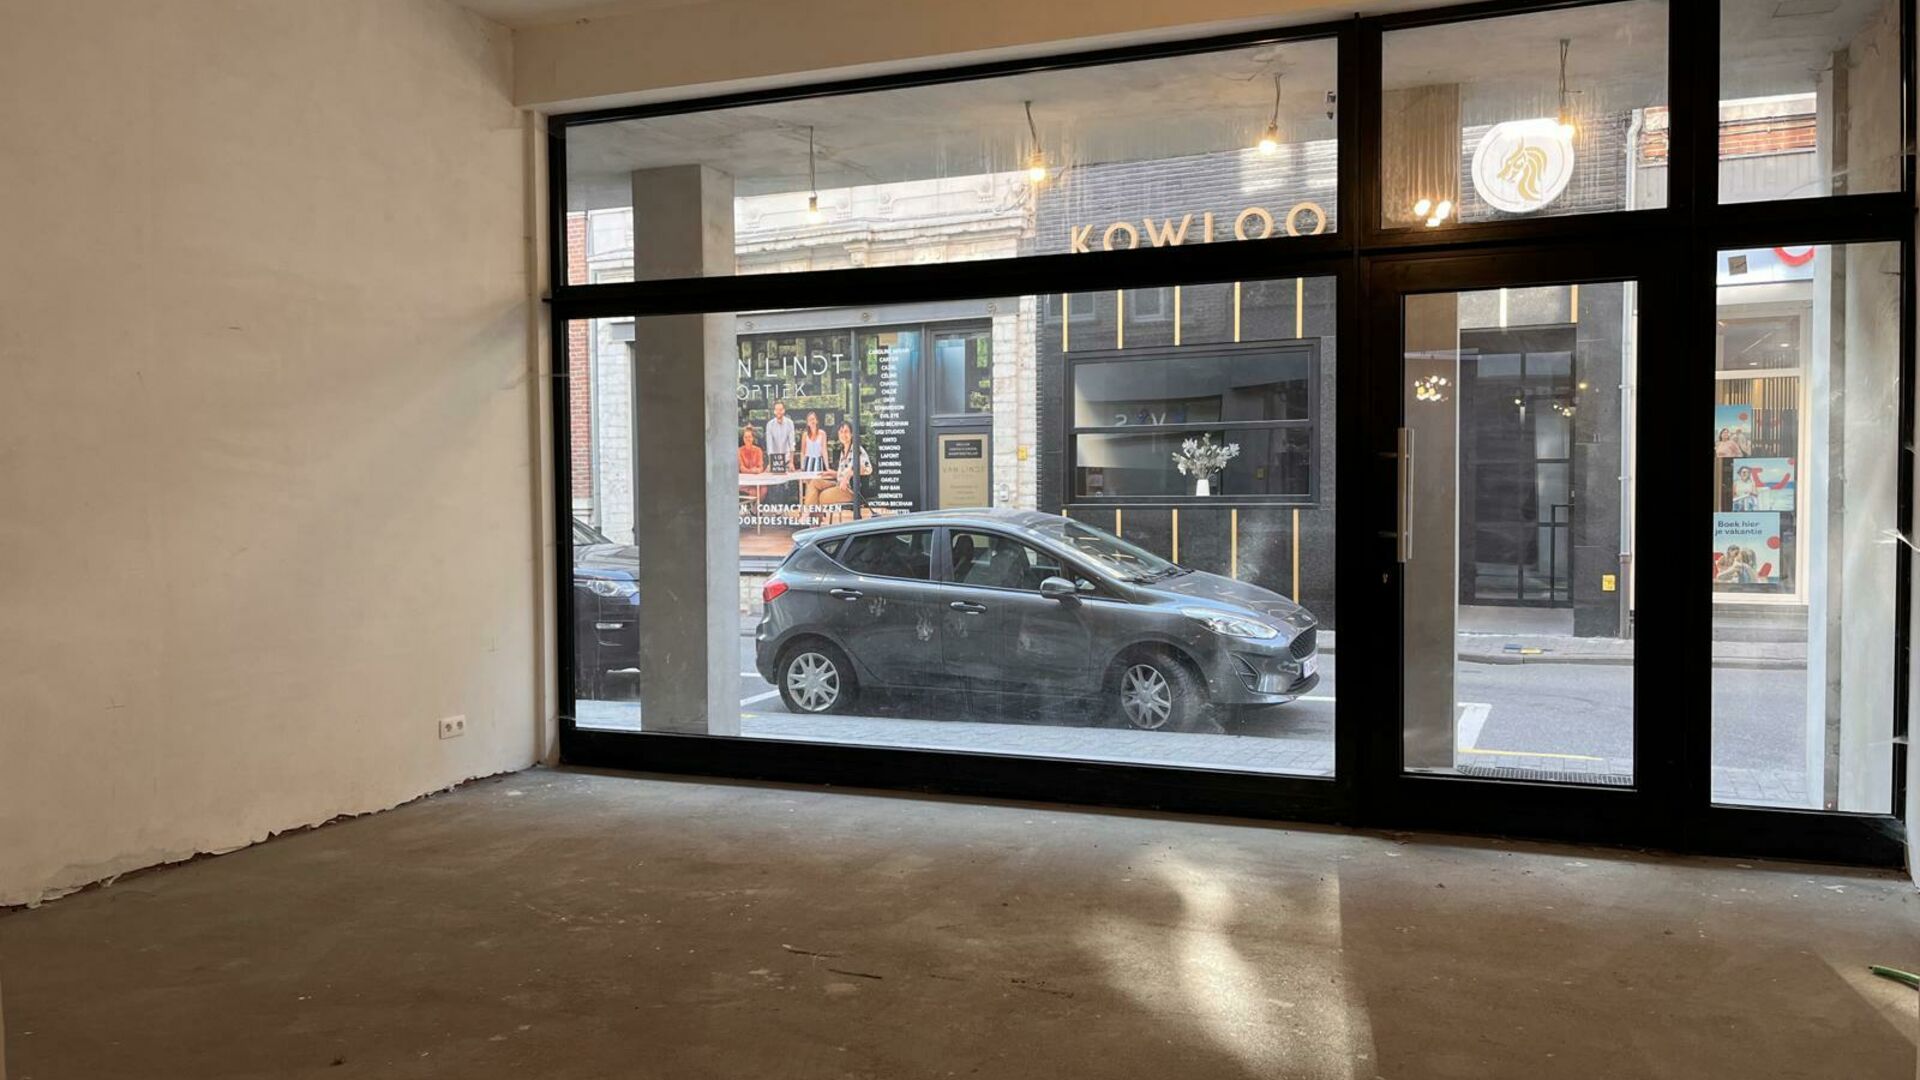 Renovated commercial property in the center of Tienen, perfectly located between the Grote Markt, spiegelstraat and parking Manege (200m). The property has a surface area of 150m2 with a large and modern new display window with large showcase, very high c